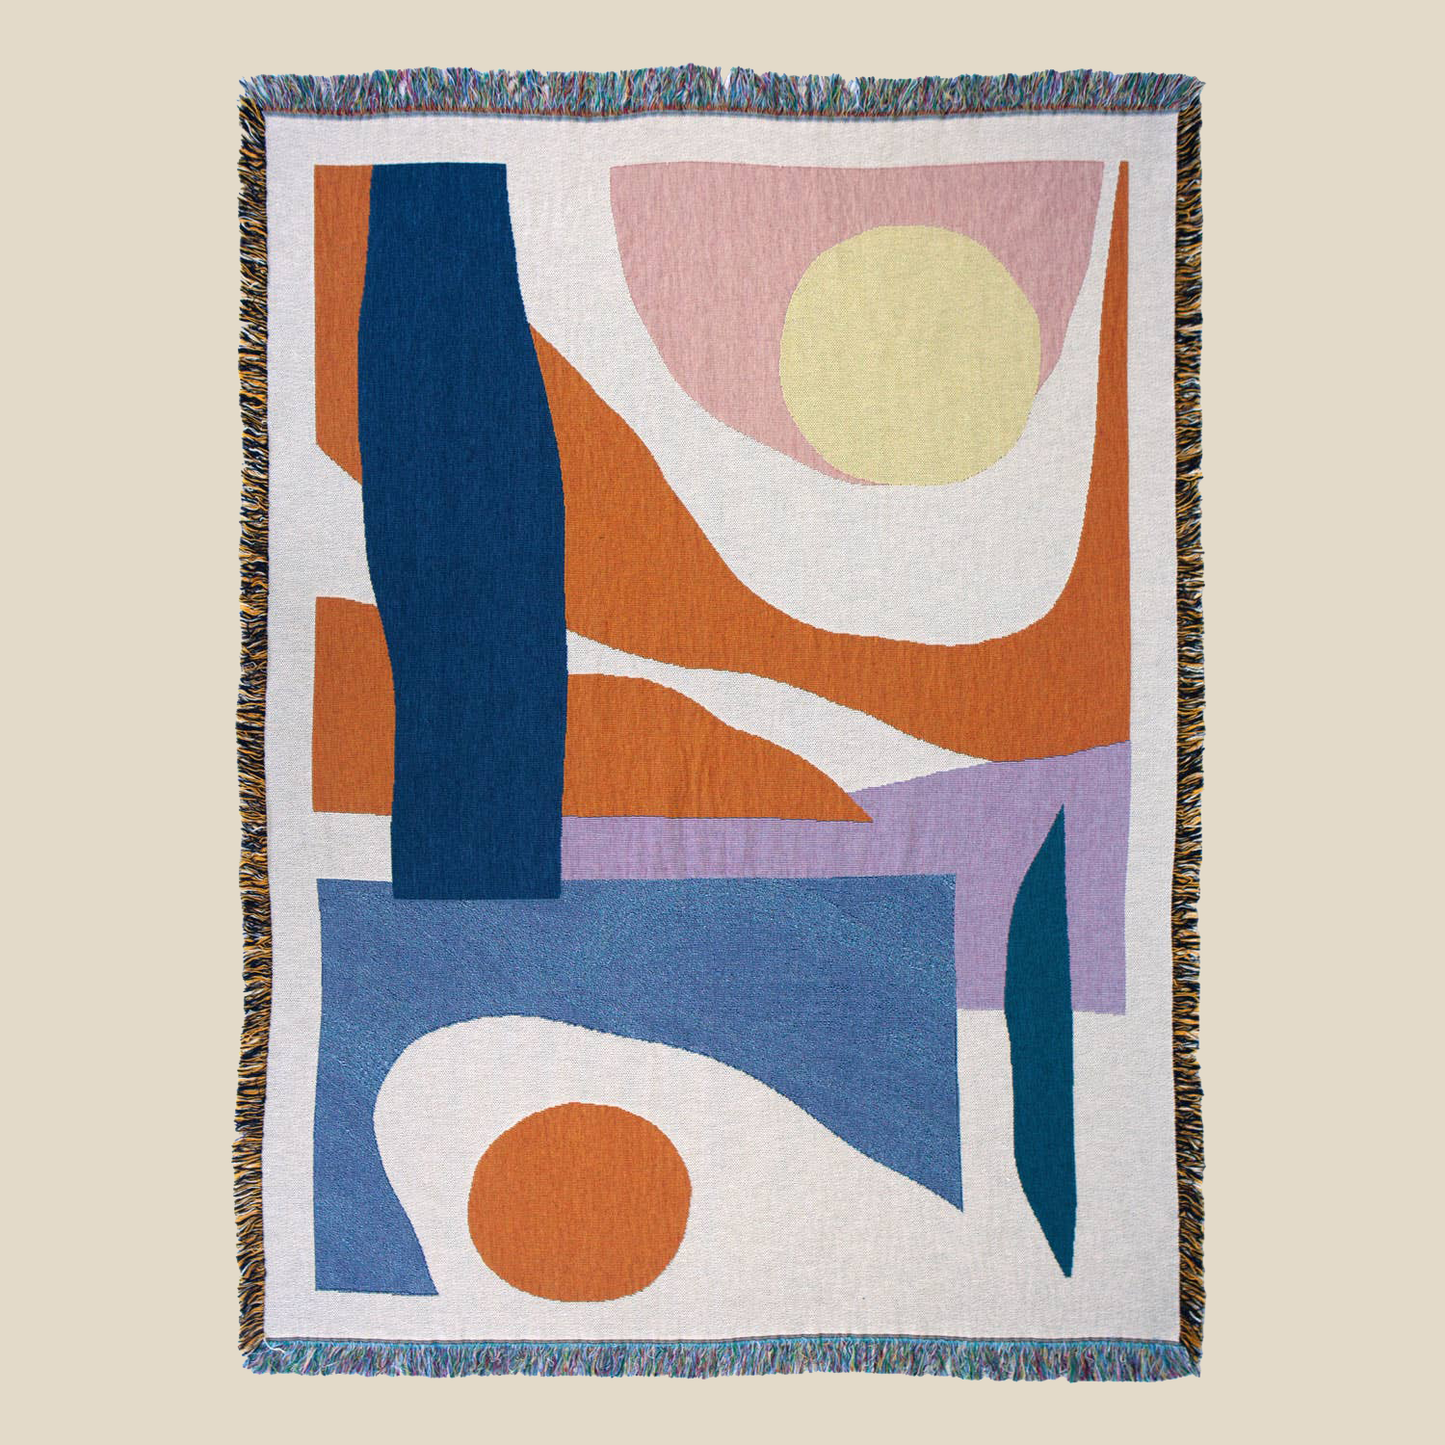 "Essien" throw by Slowdown Studio depicts an abstract sunrise/sunset in earthy orange and blue hues